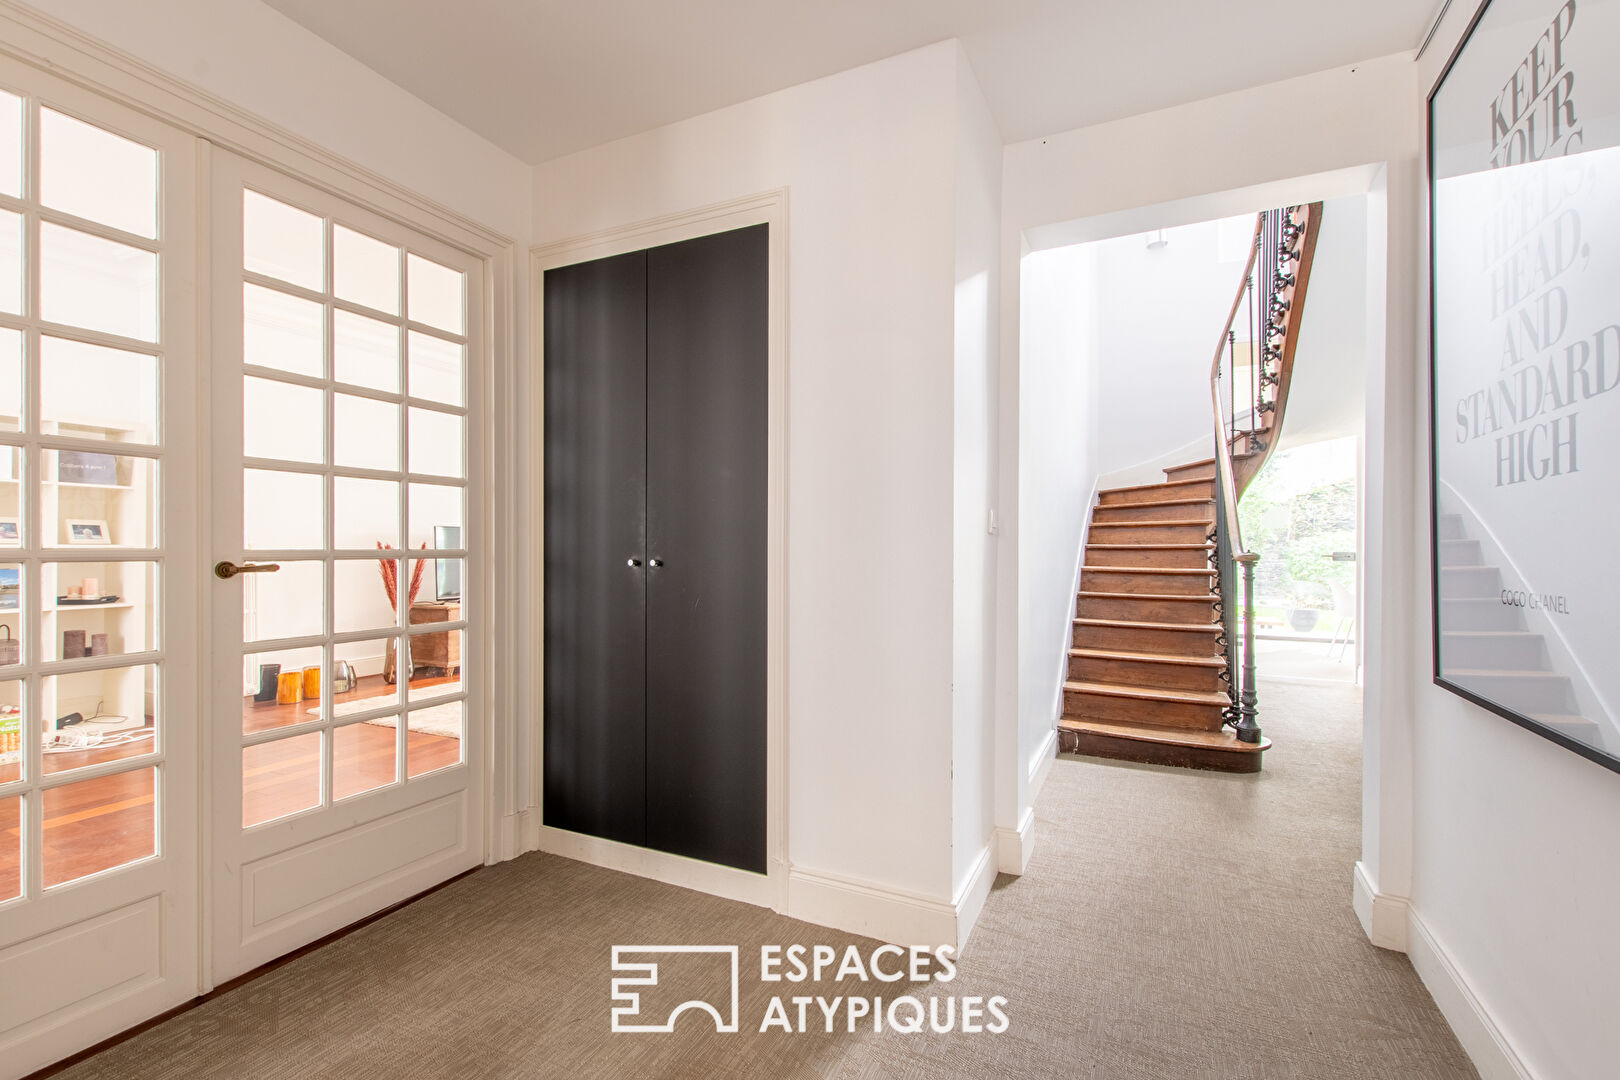 Exceptional house in the heart of Angers